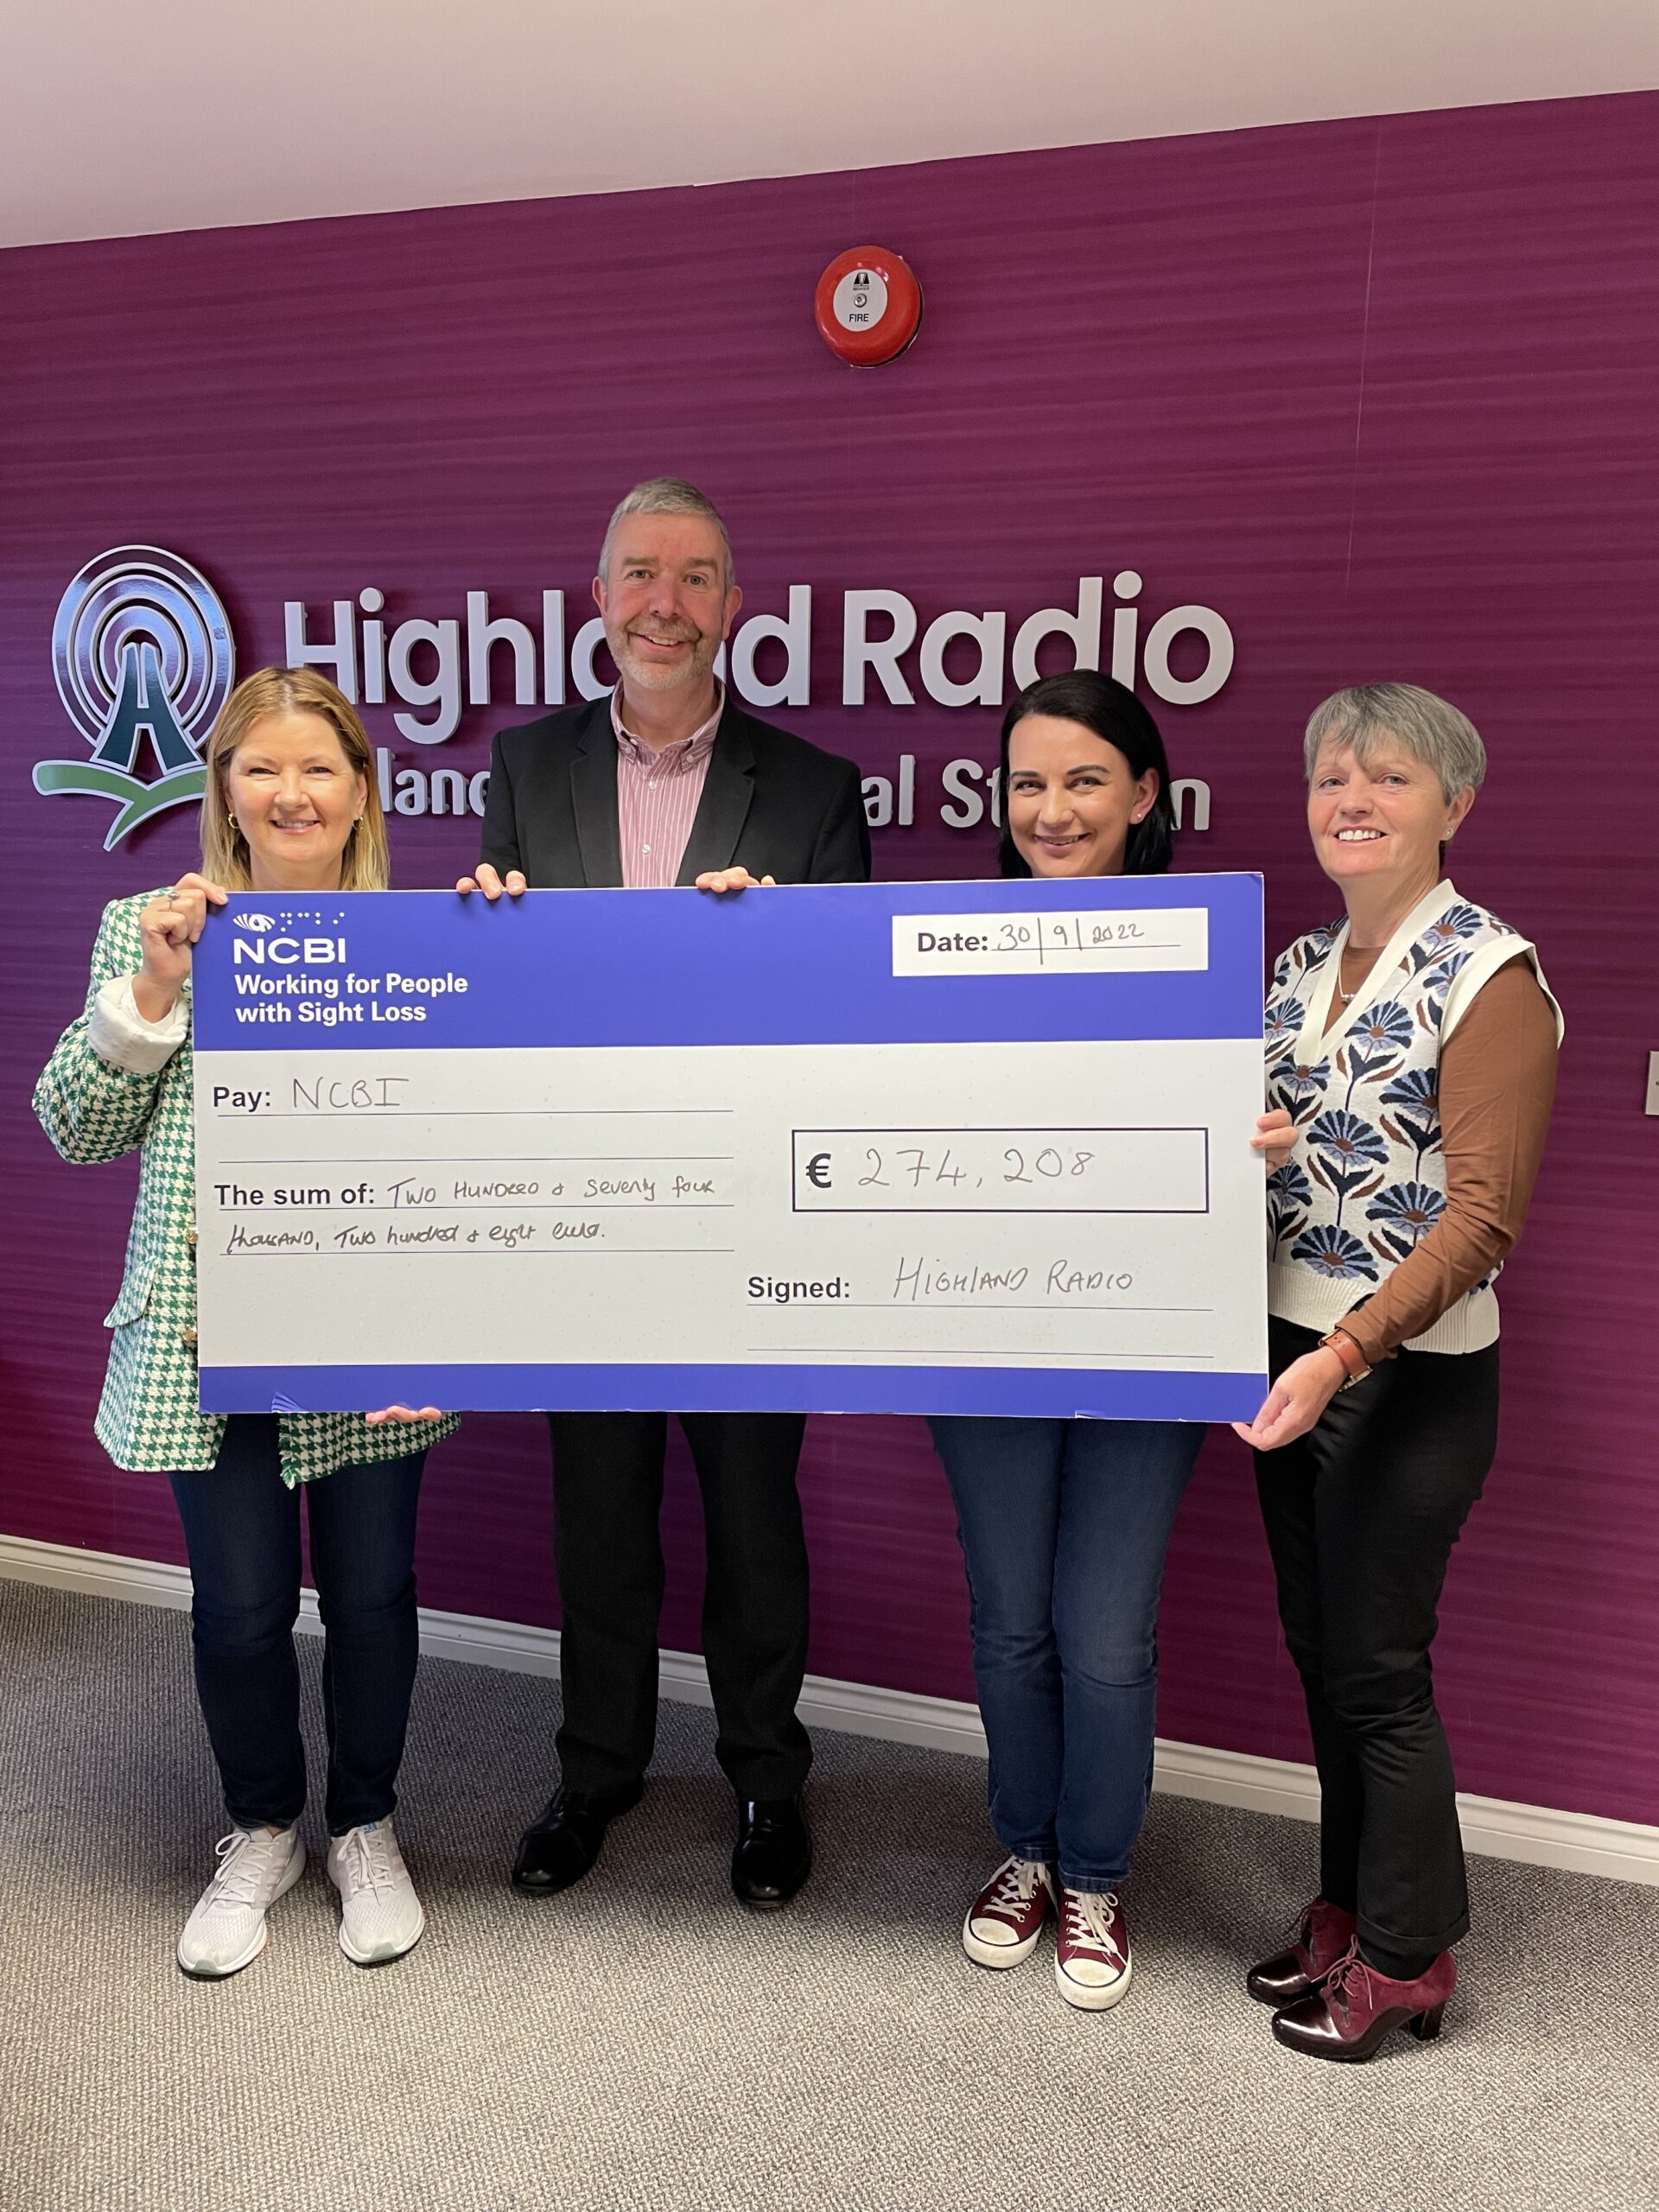 Joanne McCarney, Vision Ireland Fundraising Executive, and Danny Cahill, Vision Ireland National Services Manager for the Adult Team, accept a cheque for Vision Ireland for over €270,000 from the team at Highland Radio Bingo.